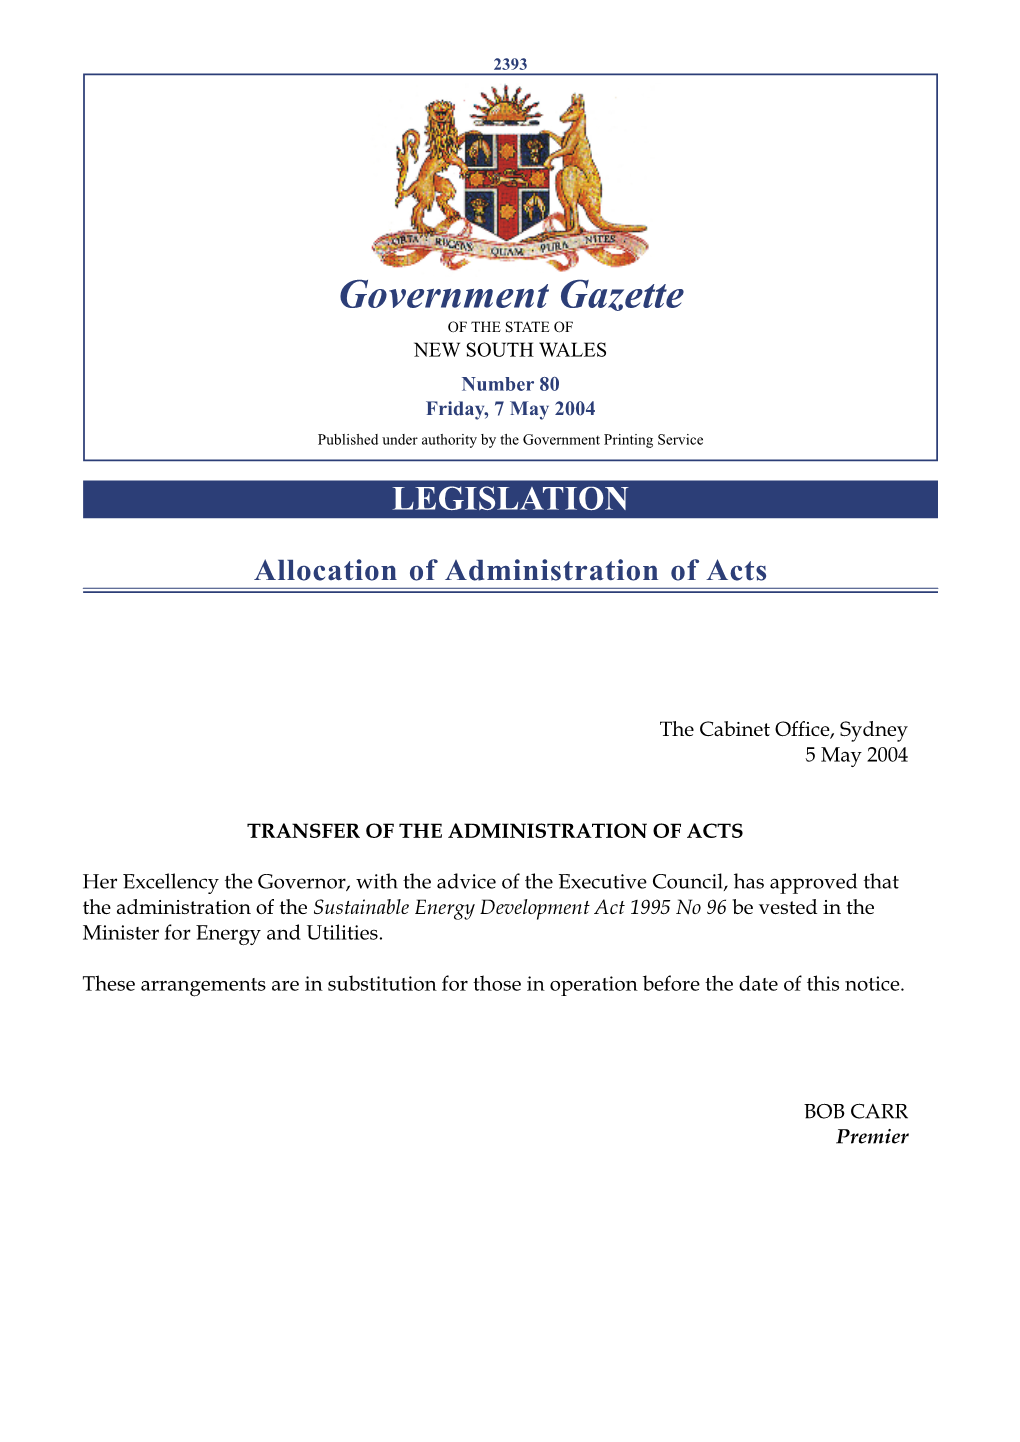 Government Gazette of the STATE of NEW SOUTH WALES Number 80 Friday, 7 May 2004 Published Under Authority by the Government Printing Service